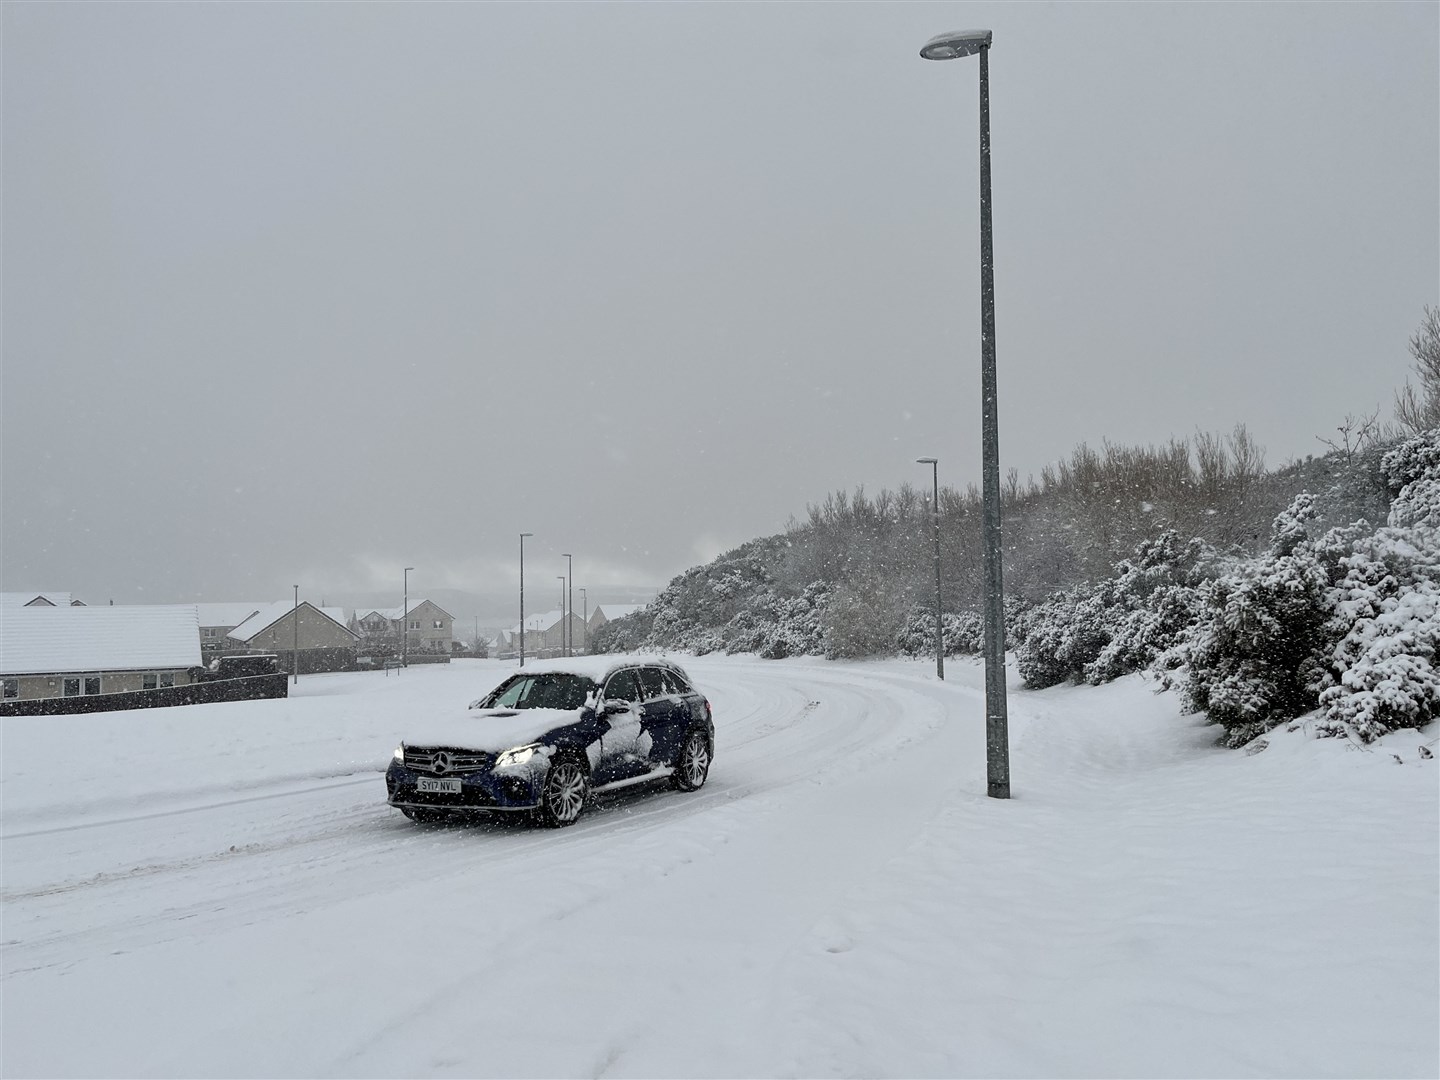 Snow in Milton of Leys in Inverness.